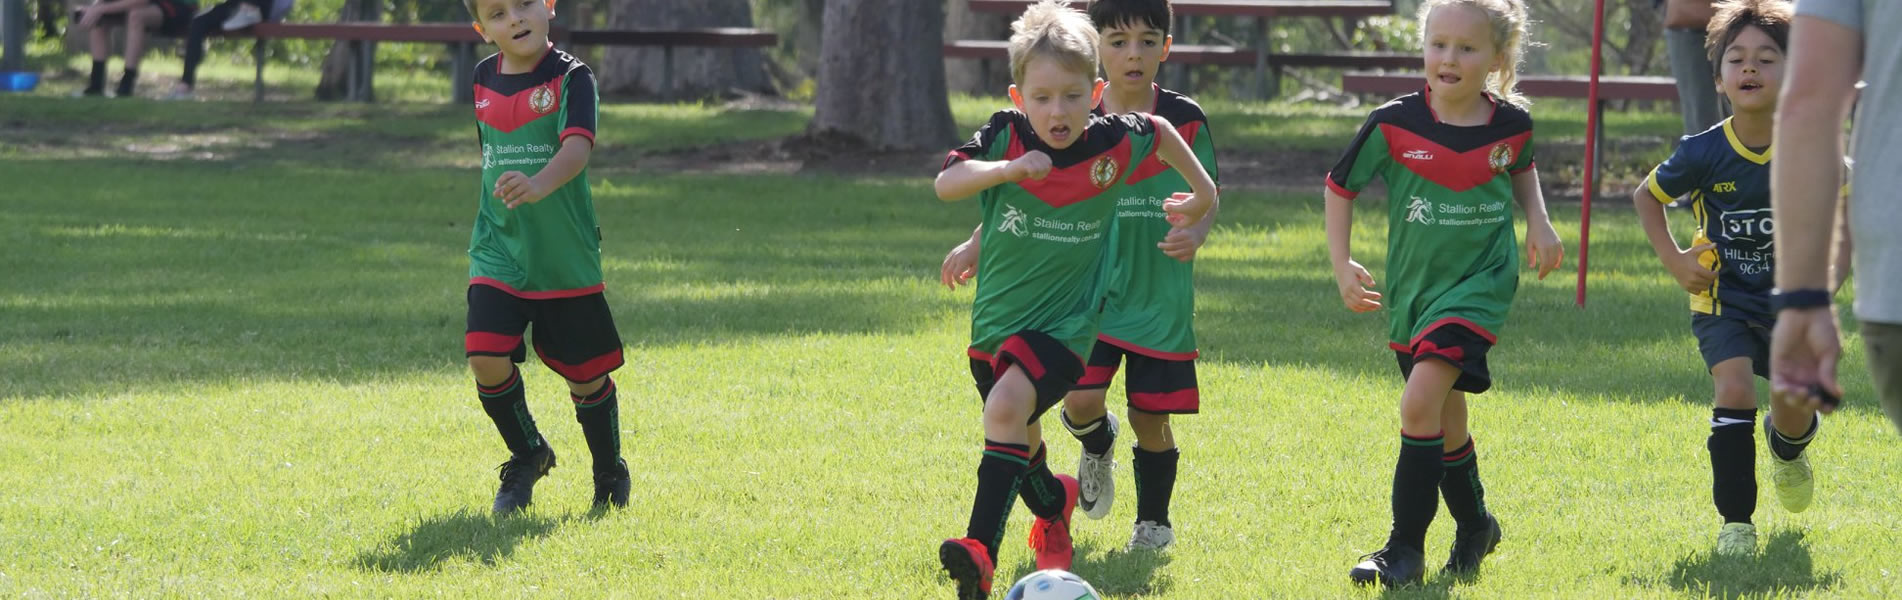 Claim your Active Kids Rebate with GlenhavenFC